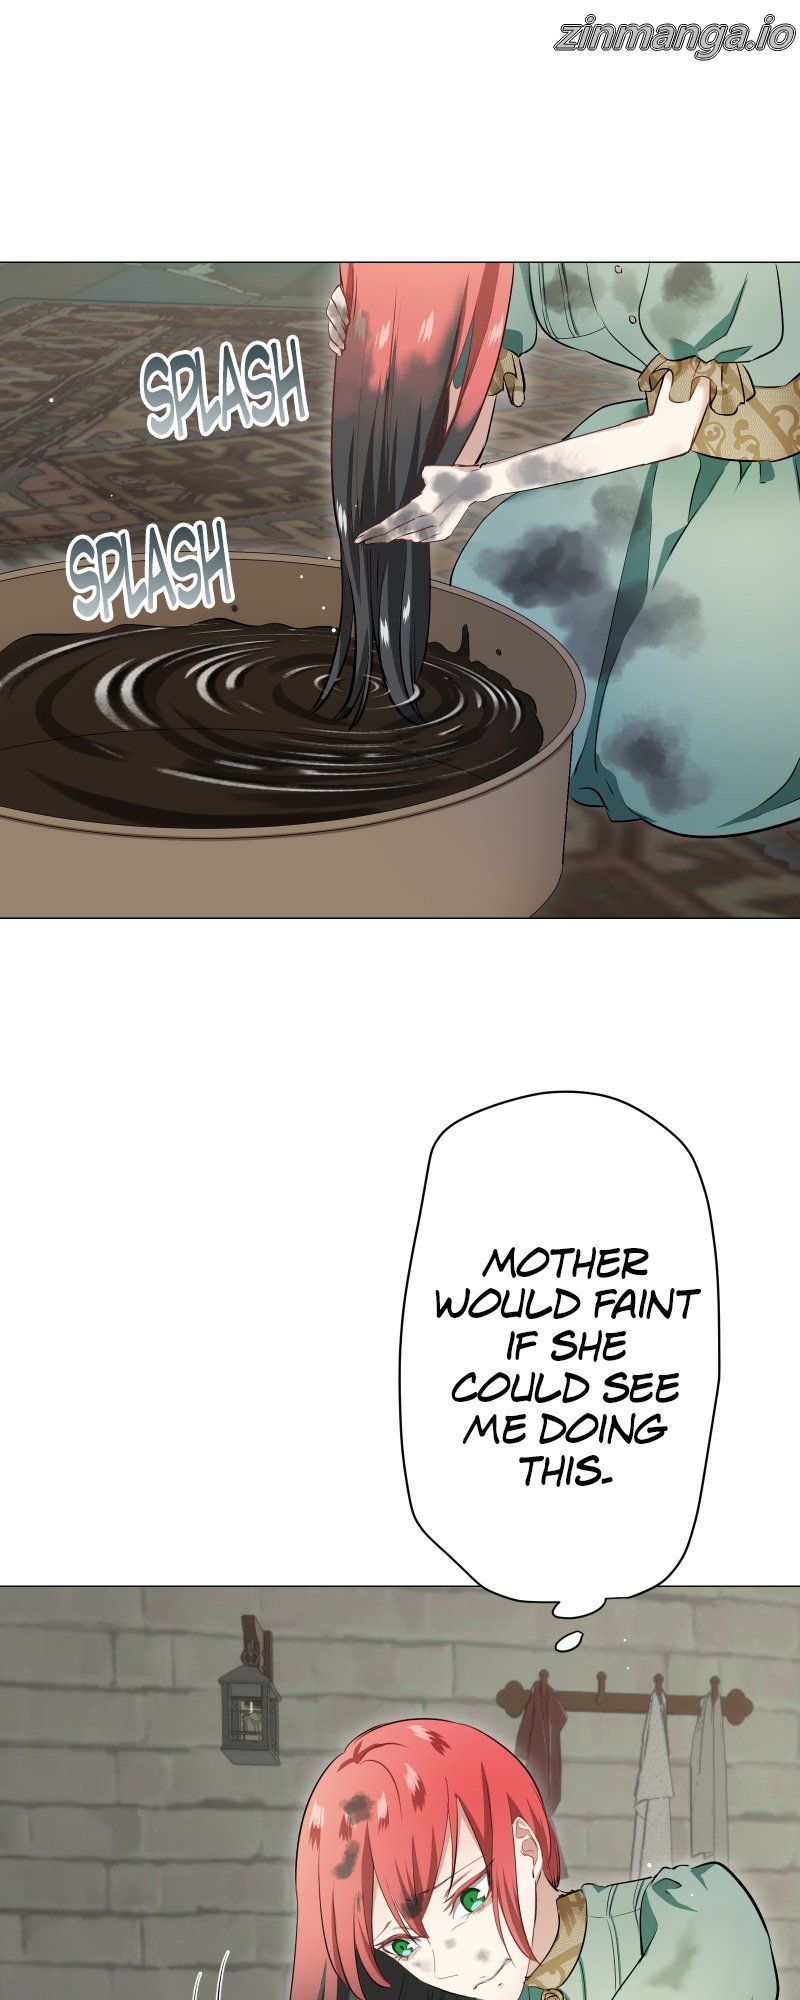 Nulliitas: The Half-Blood Royalty Chapter 137 page 16